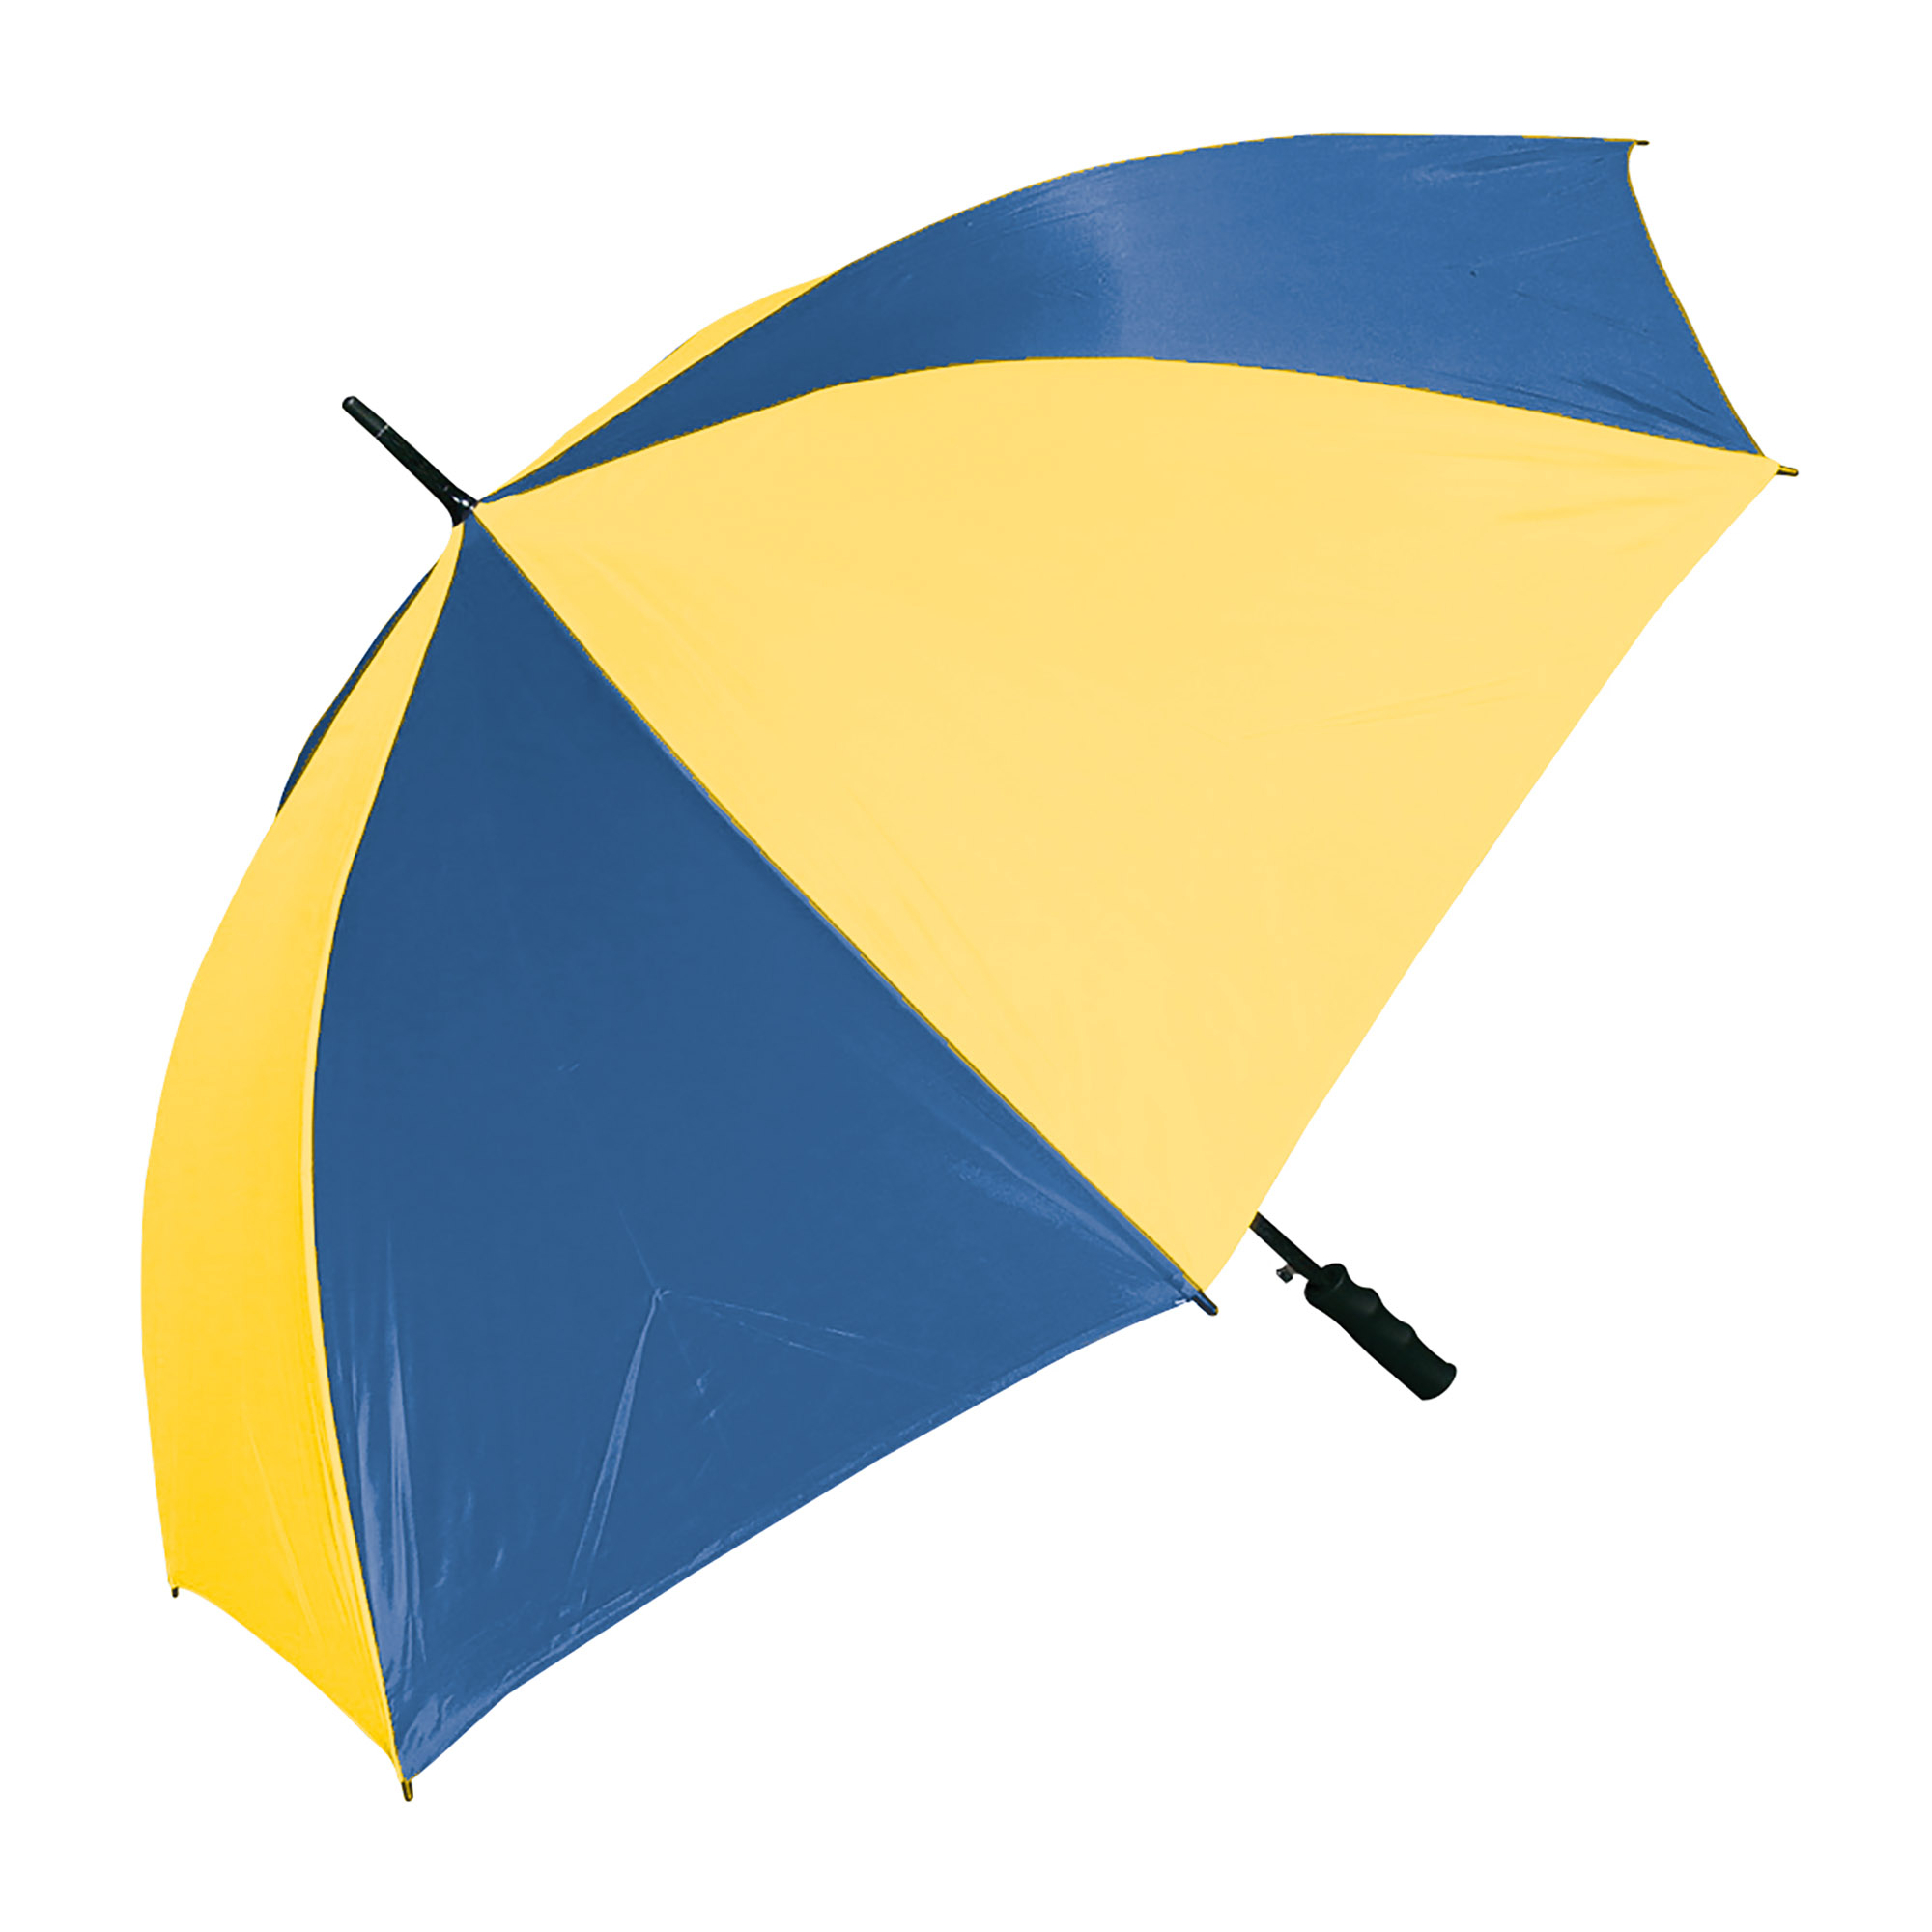 Bulk Promotional Yellow And Royal Blue Sands Umbrella Online In Perth Australia